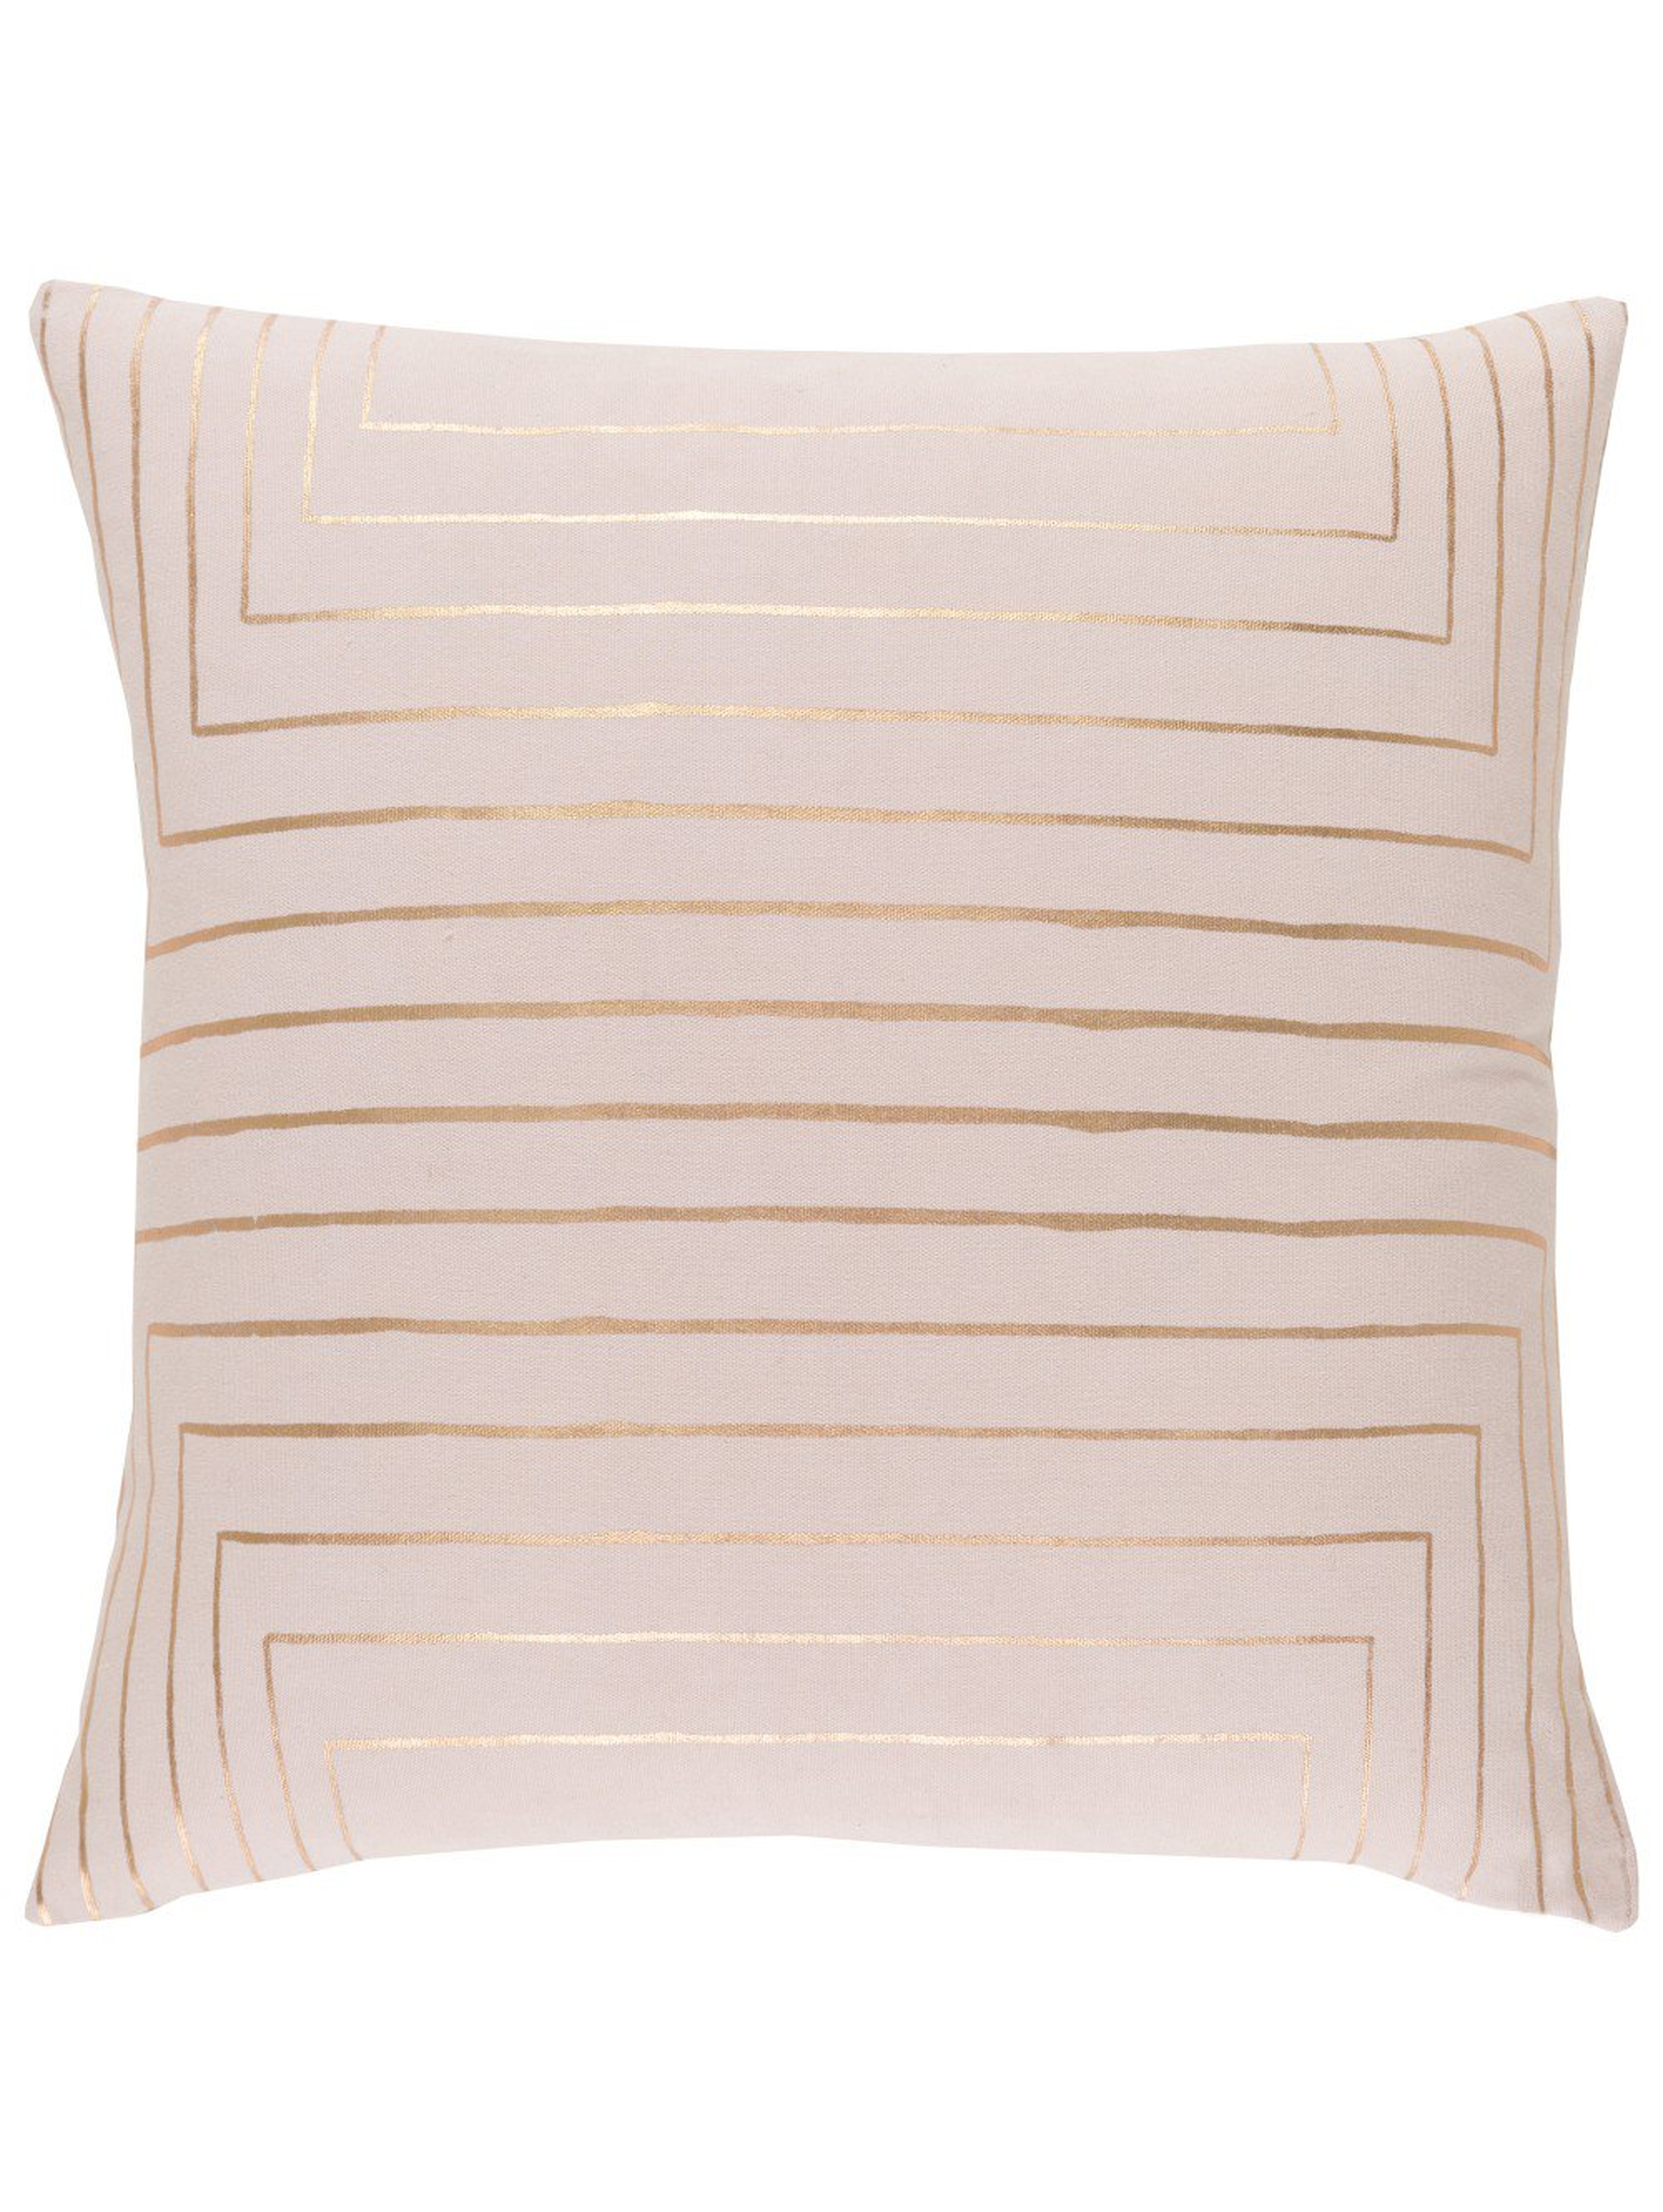 Parallels Pillow, Blush-18"x18" - Polyester Filled - Lulu and Georgia